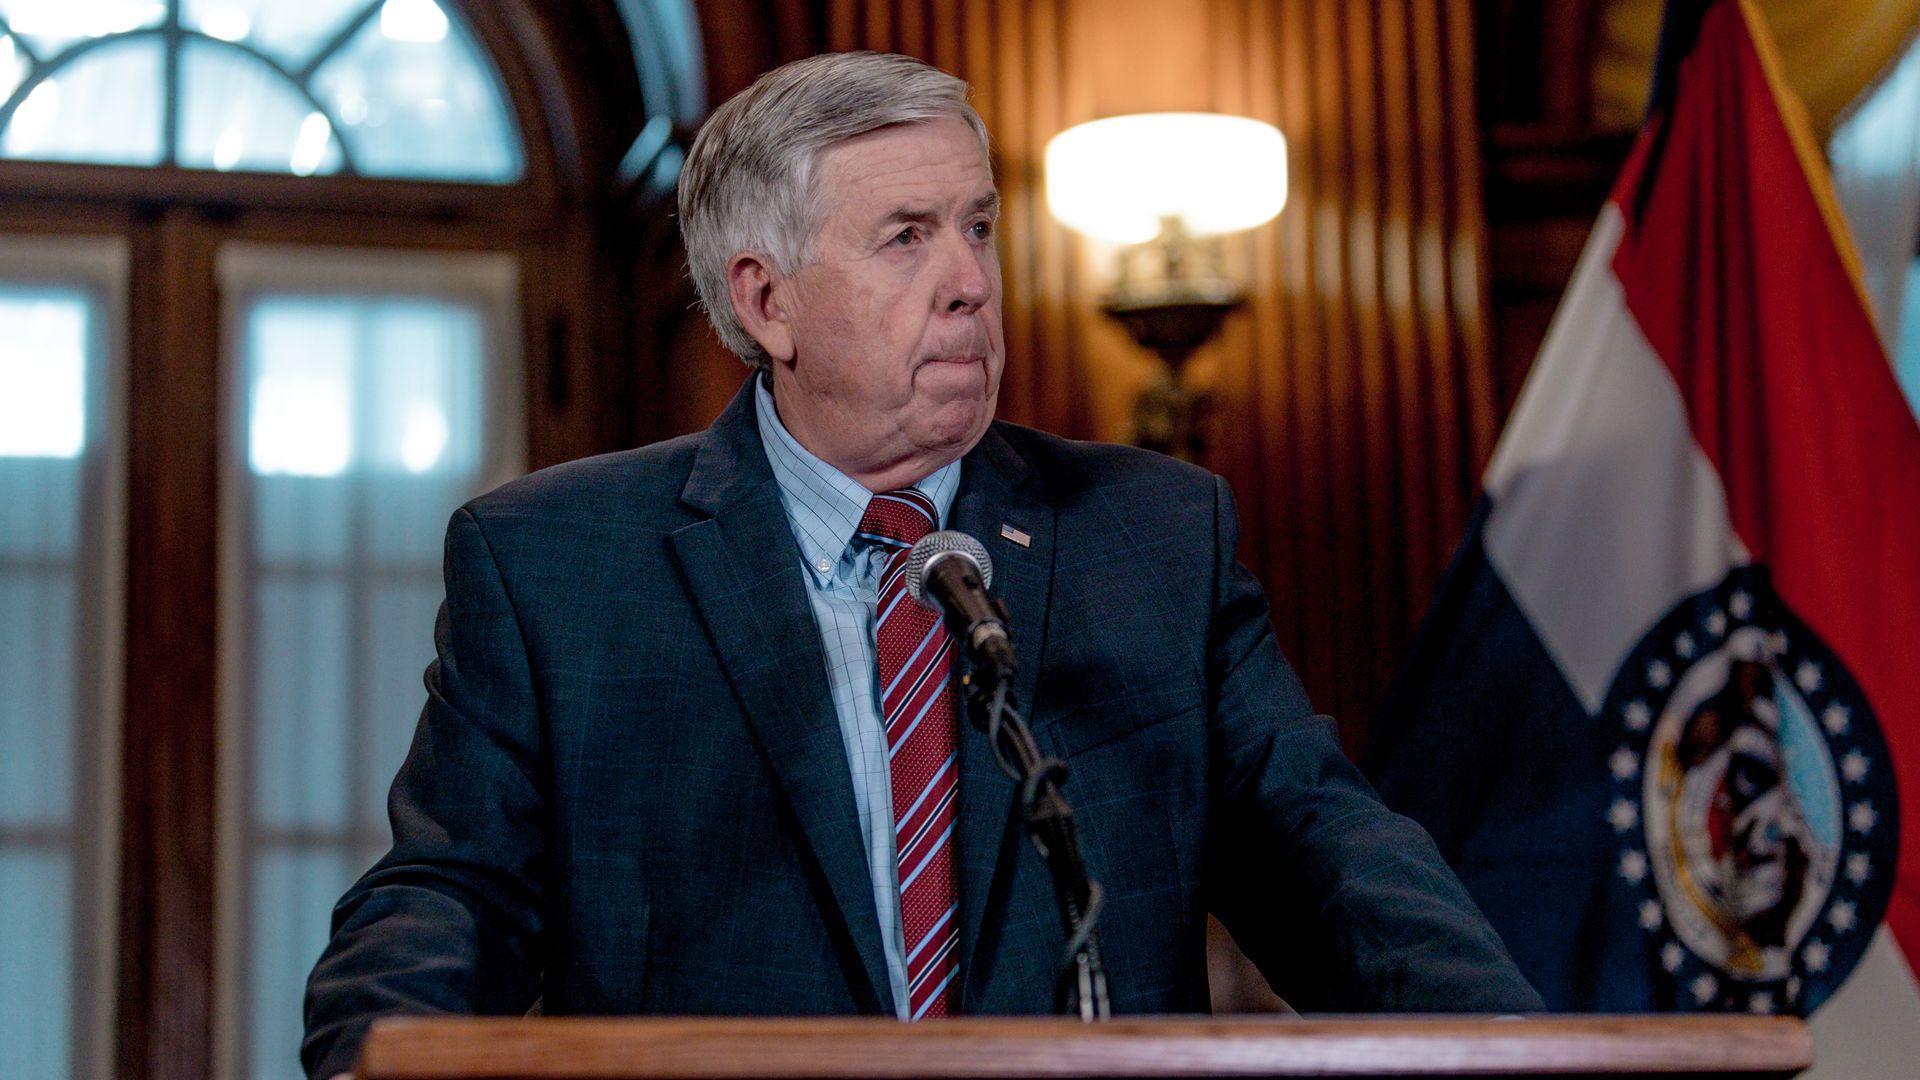 Gov. Mike Parson during a press conference in Jefferson City, Missouri, in May 2019.